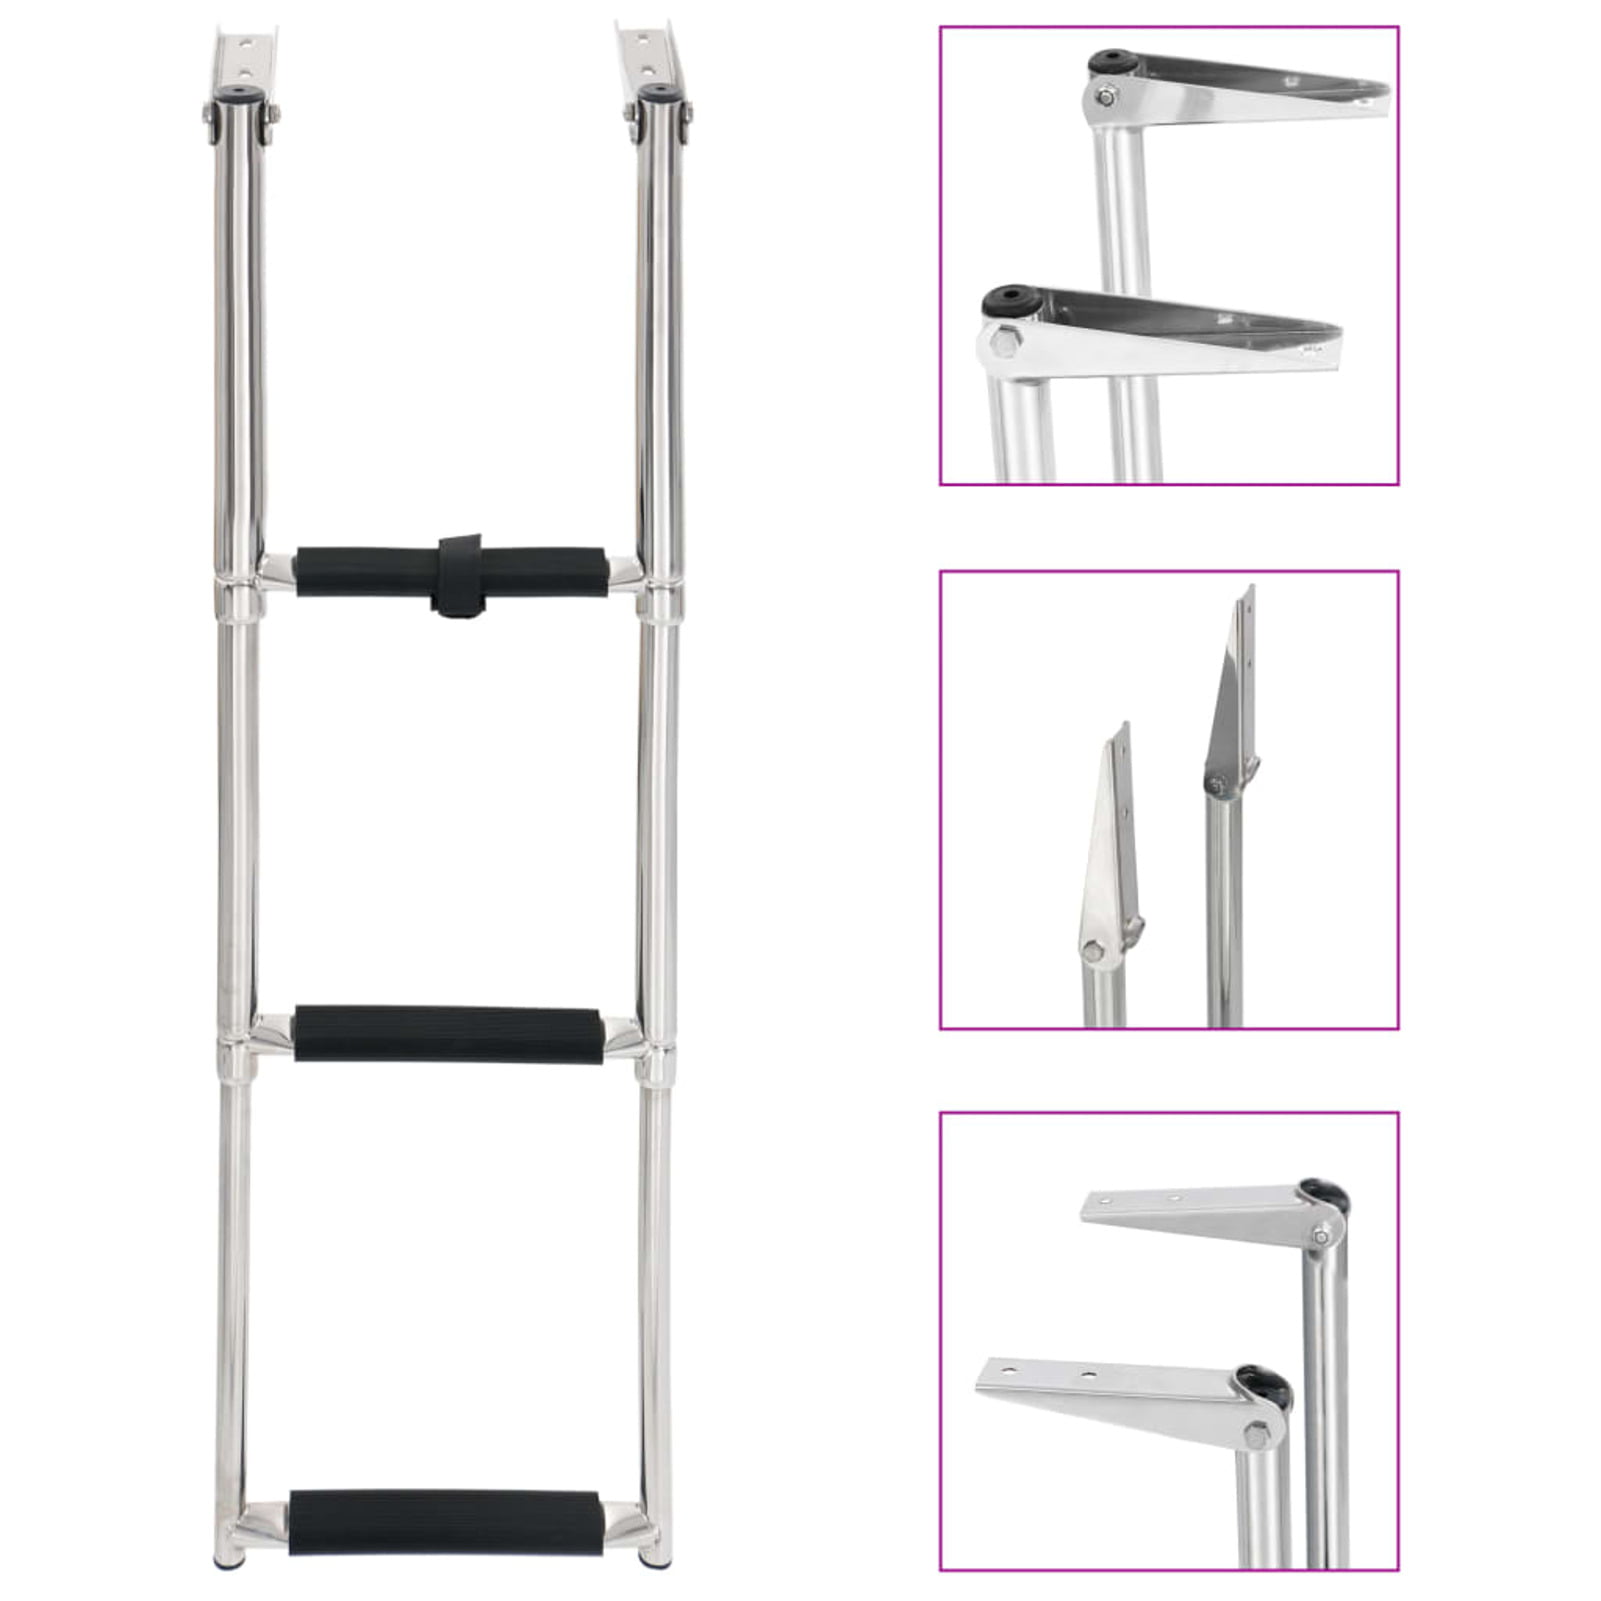 Details about   3 Steps Ladder Folding Non Slip Safety Tread Heavy Duty Industrial Home Use New 